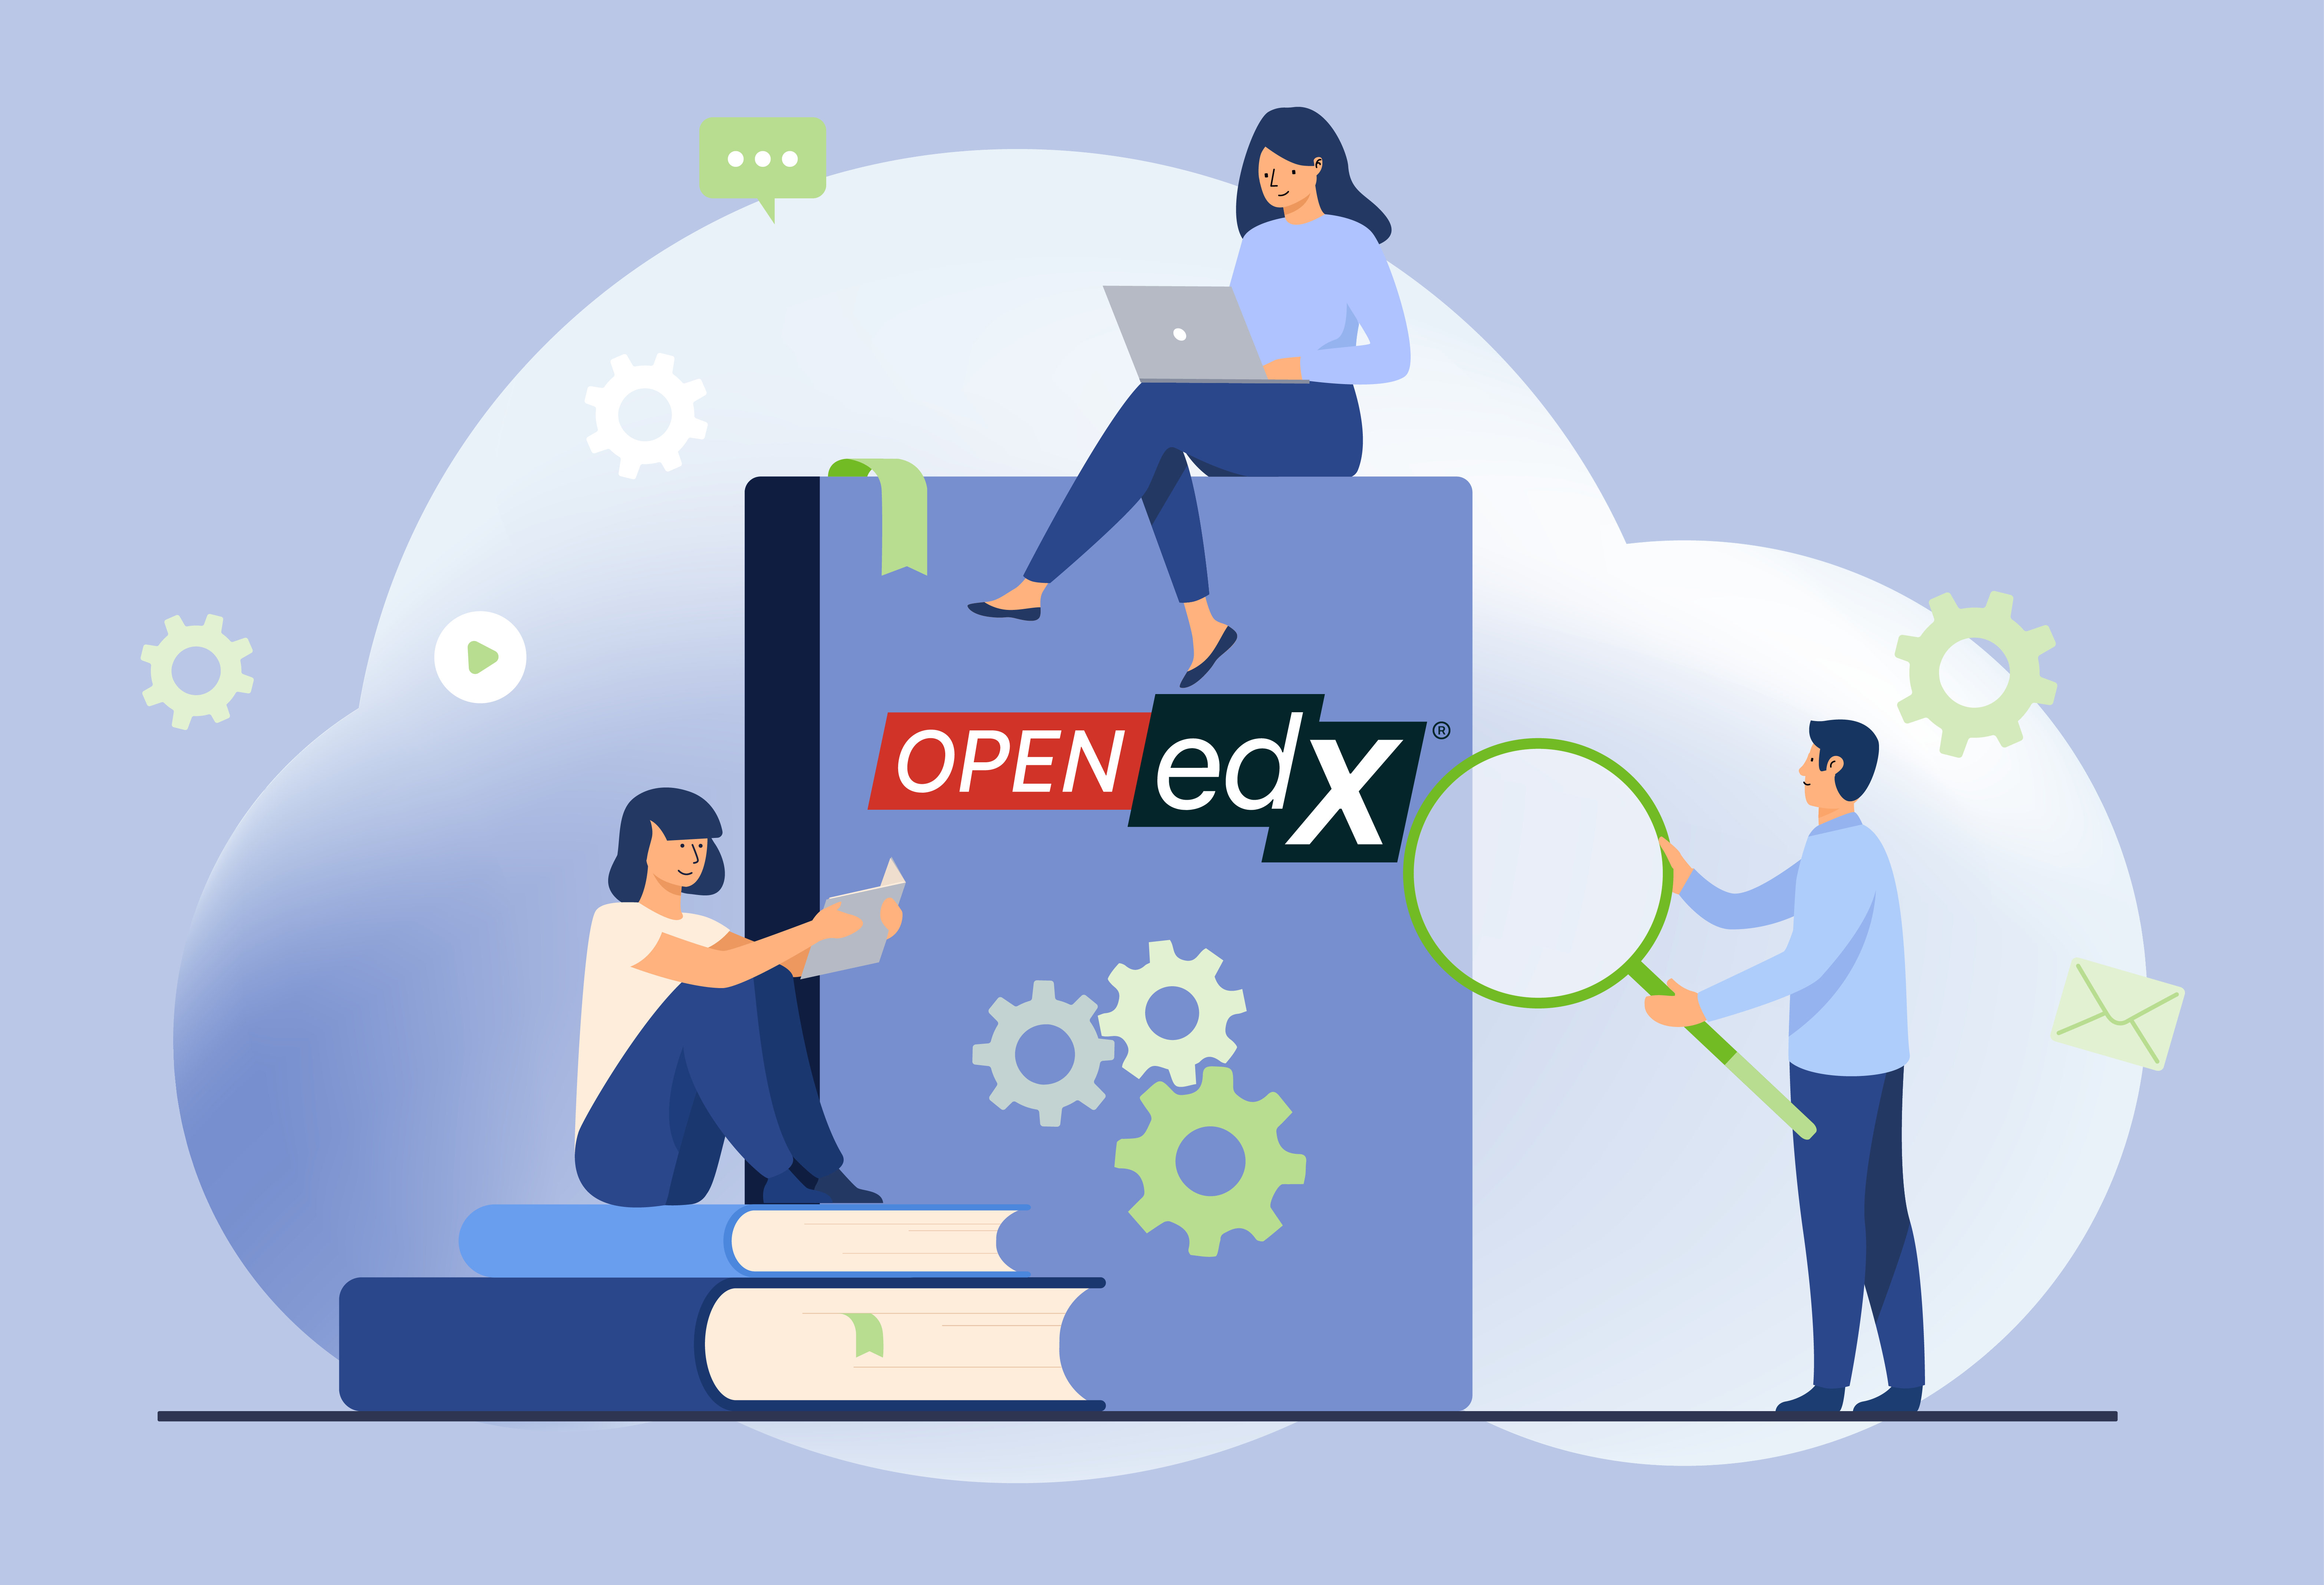 How to Use Open edX?